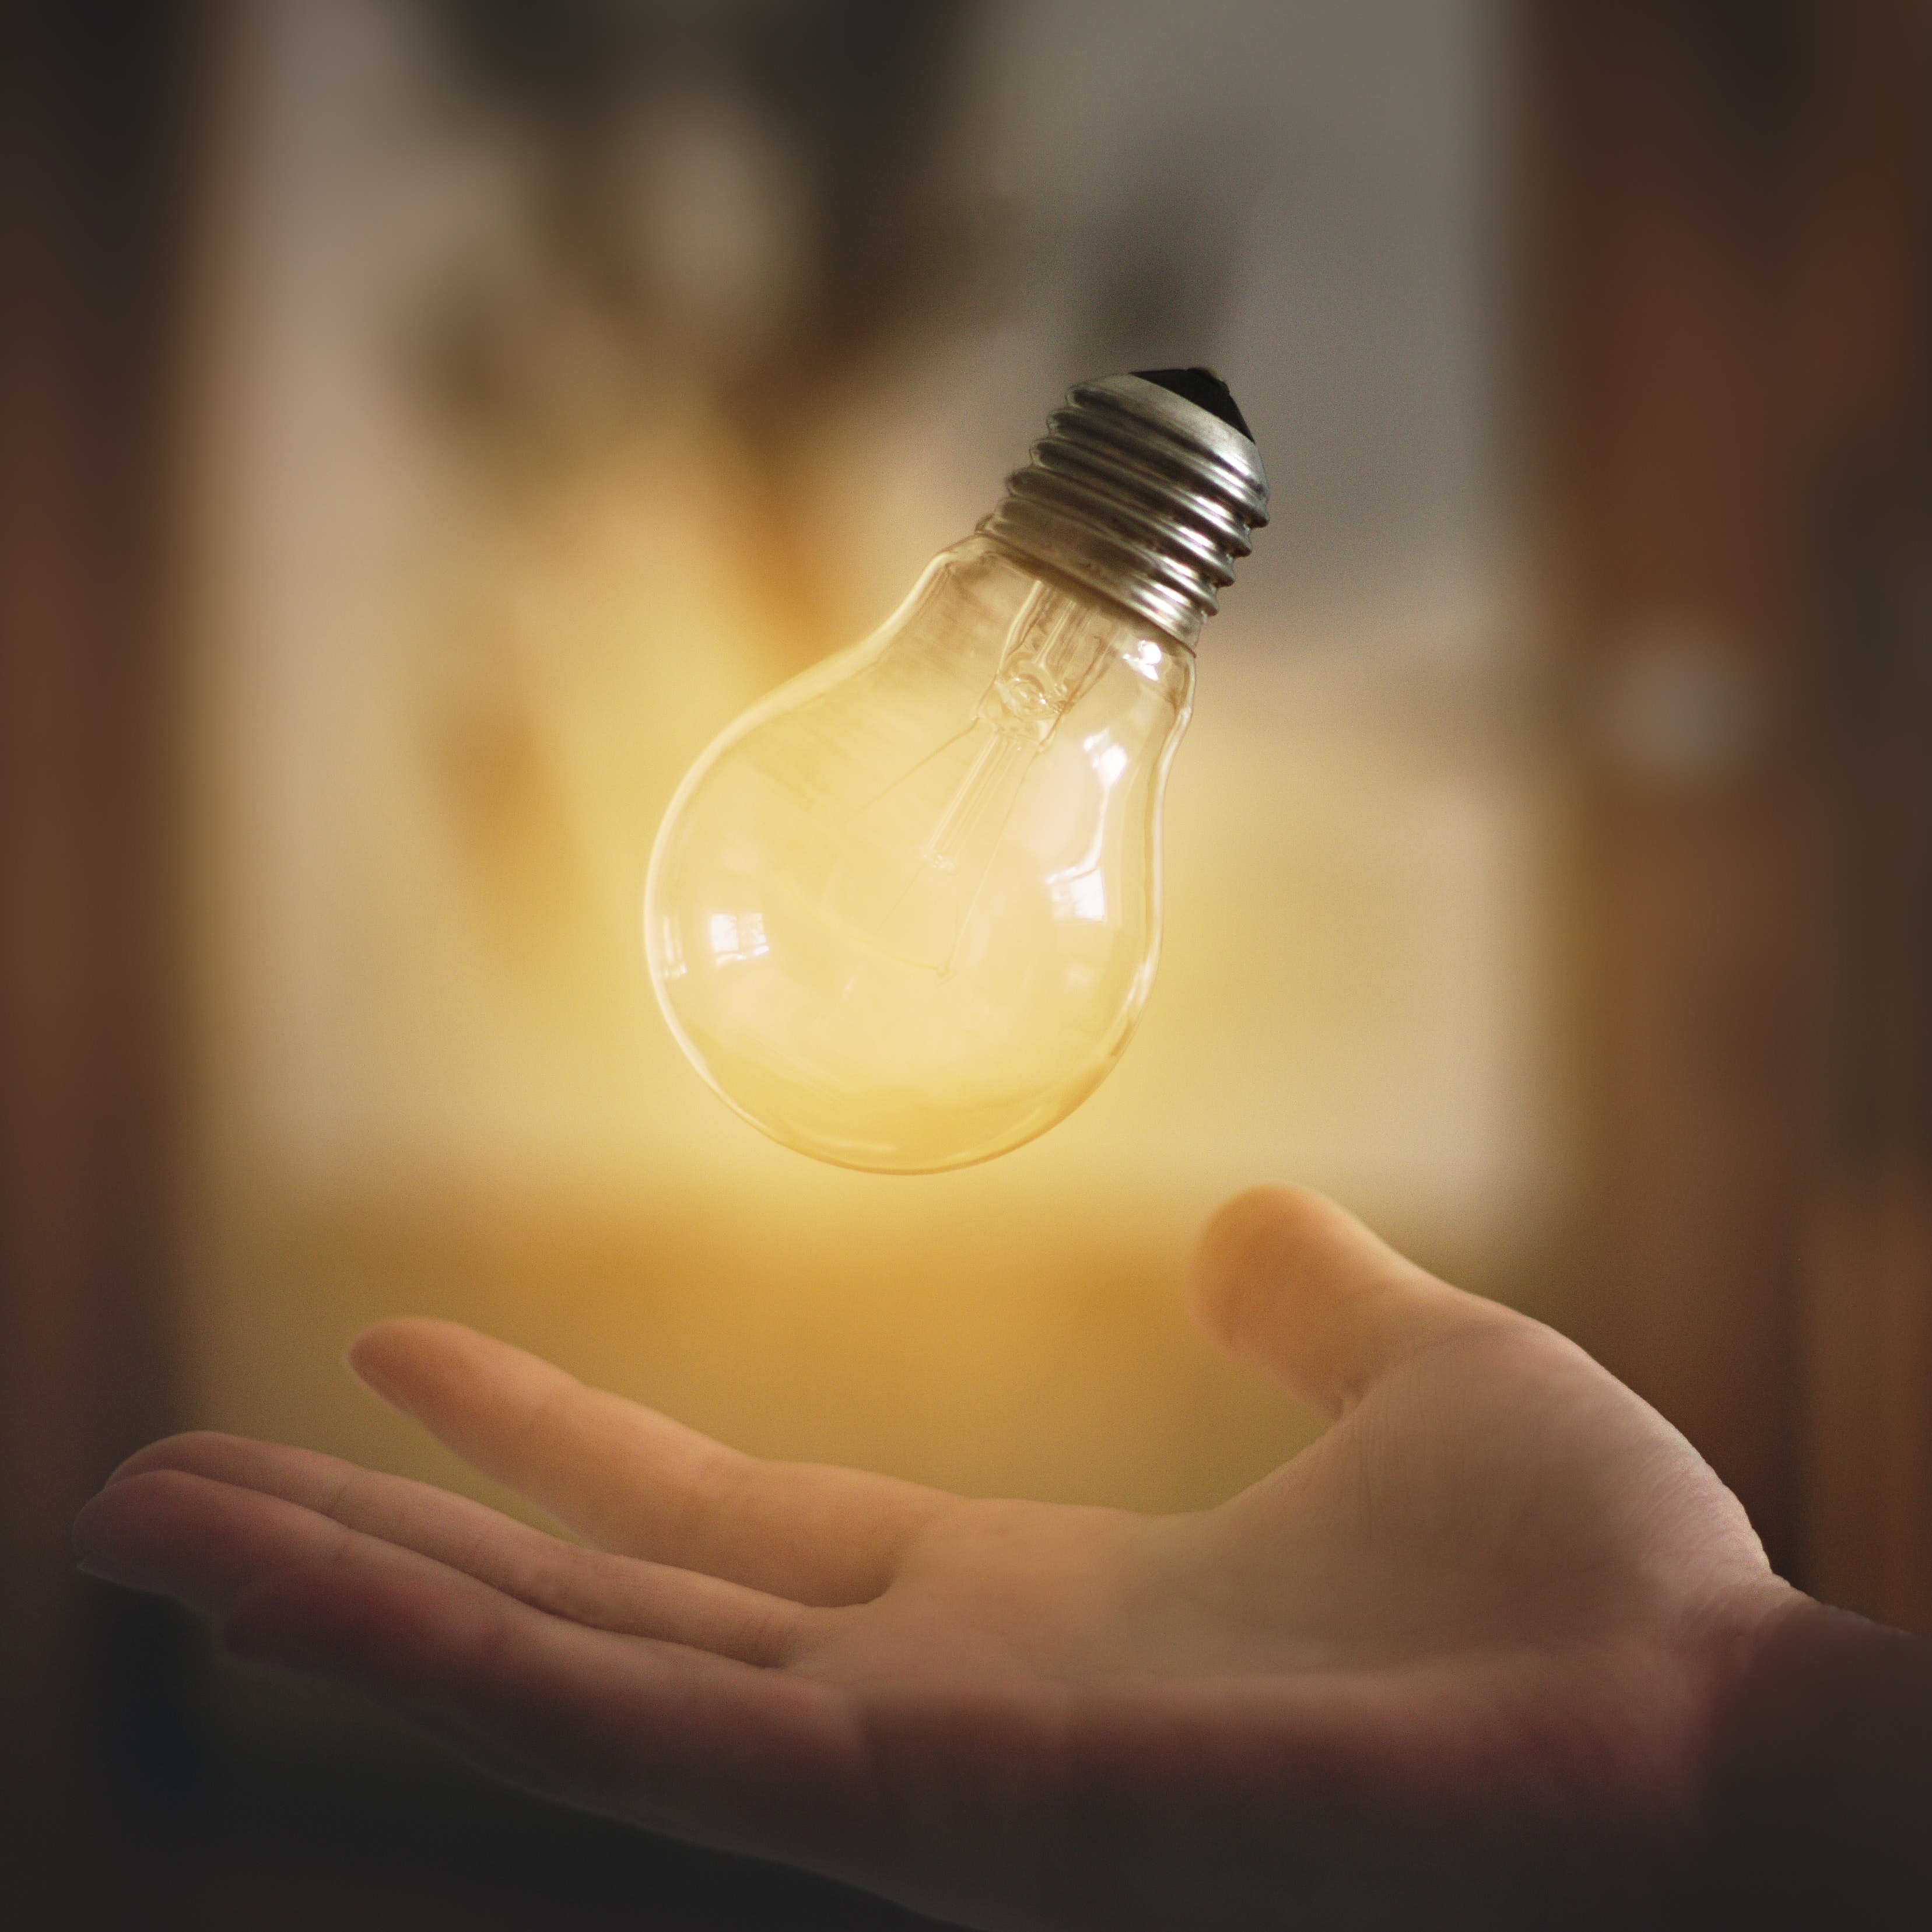 holding a bright idea in your hand